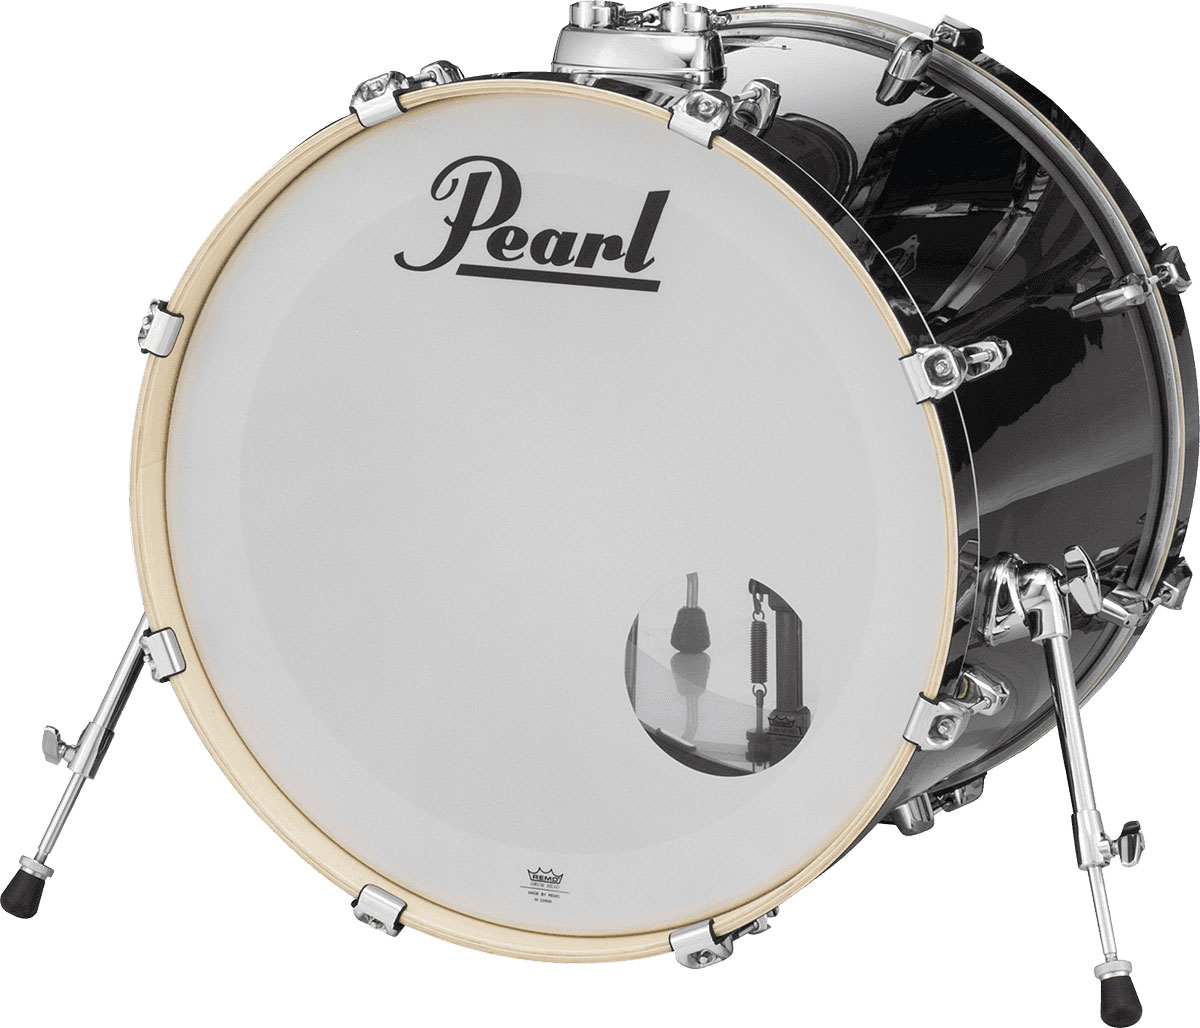 PEARL DRUMS EXX2016BC-31 - EXPORT BASS DRUM 20